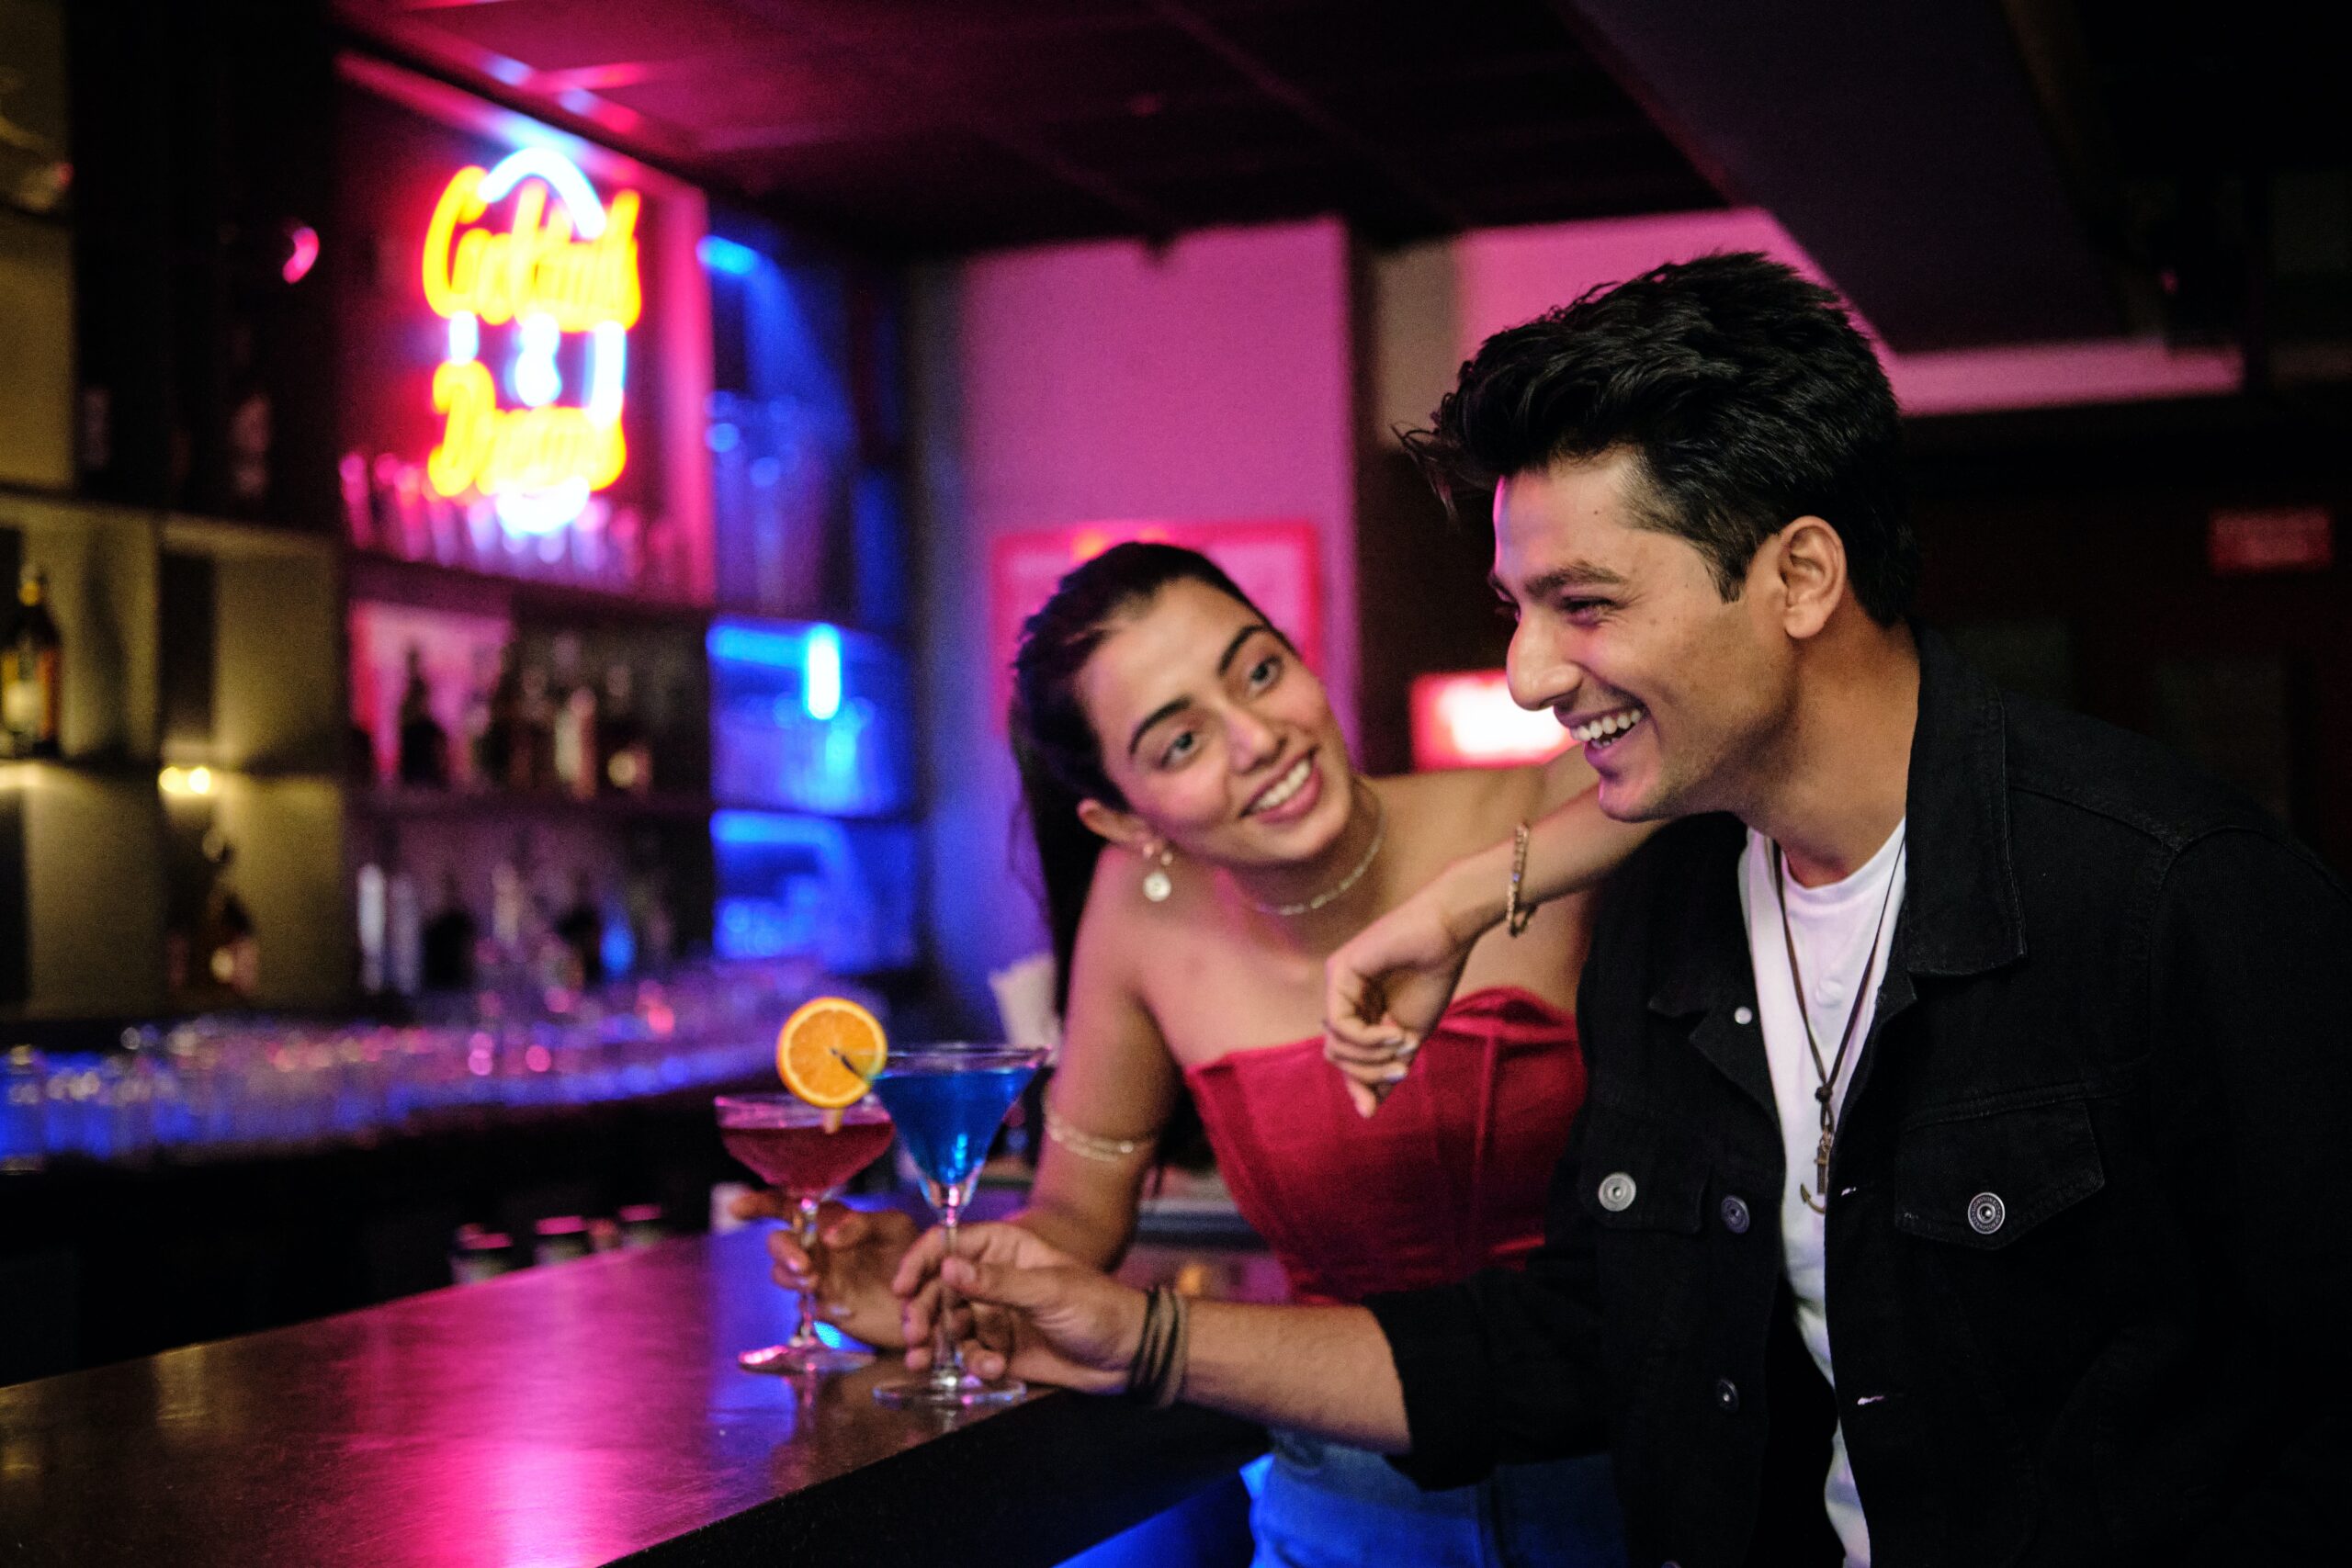 The Pitfalls of Liquid Courage: Why Drinking Alcohol Before a Date Is Problematic